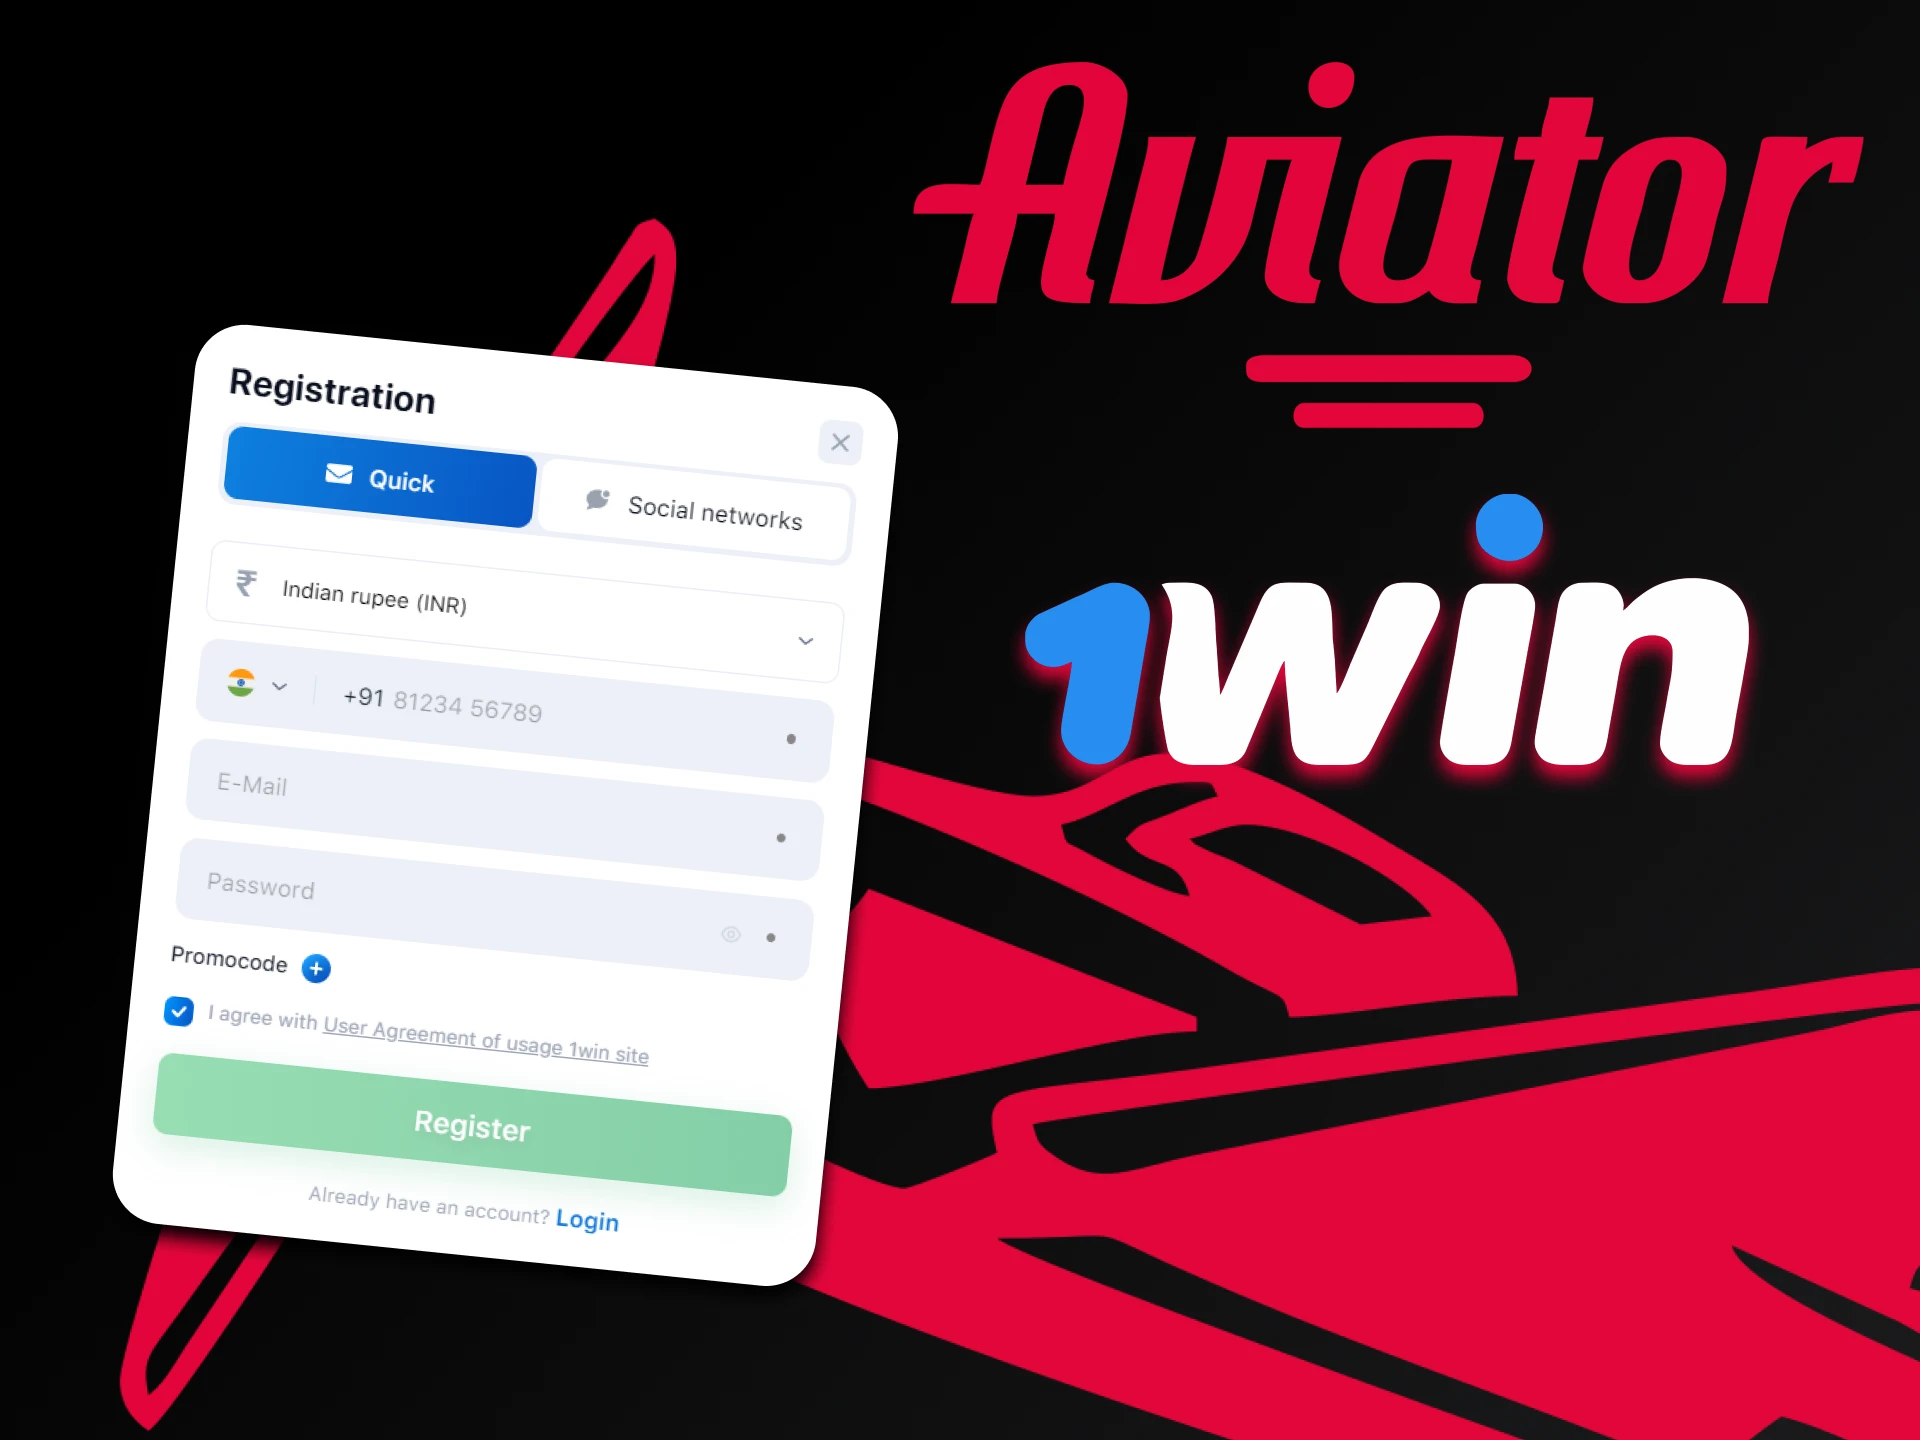 Go through the registration process on 1win to play Aviator.